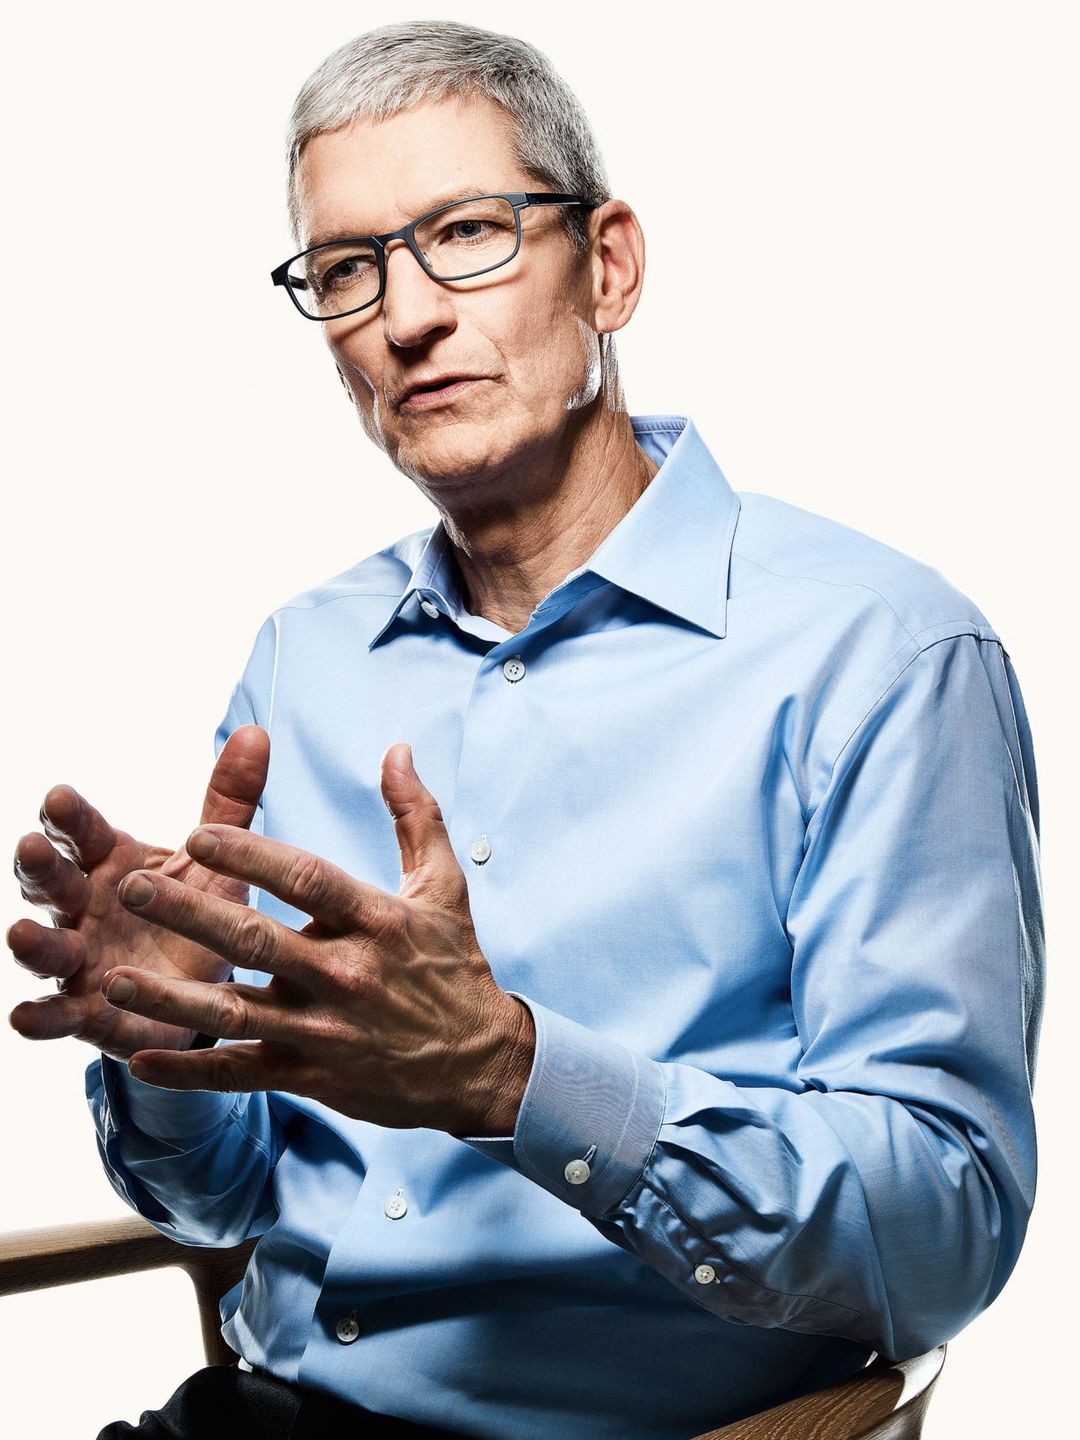 Tim Cook place of birth